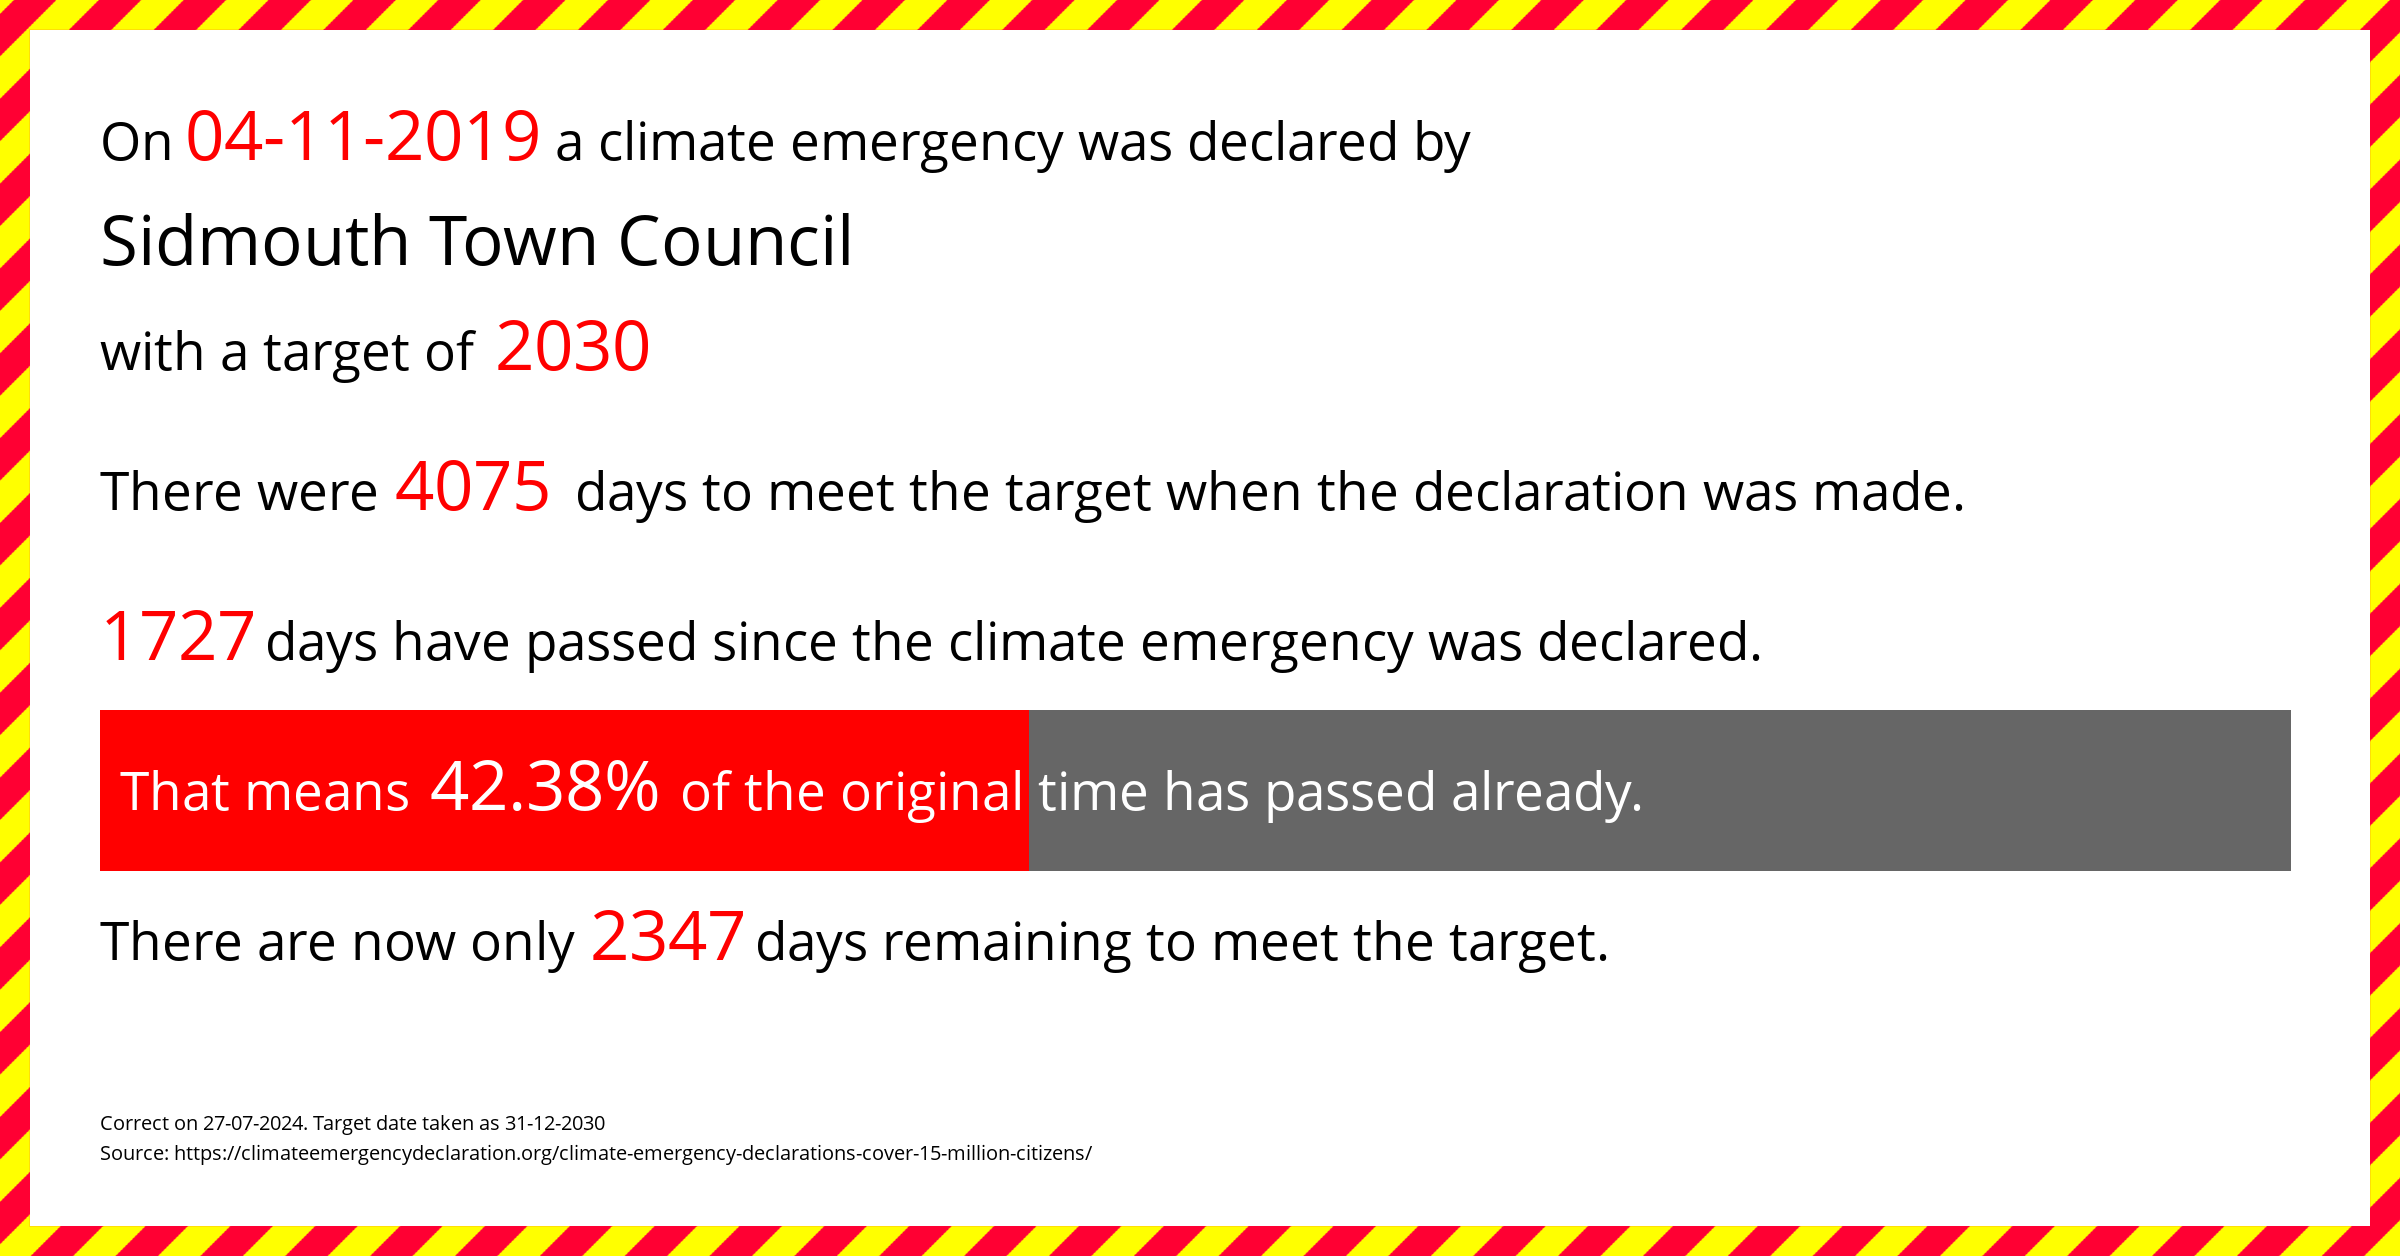 Sidmouth Town Council declared a Climate emergency on Monday 4th November 2019, with a target of 2030.